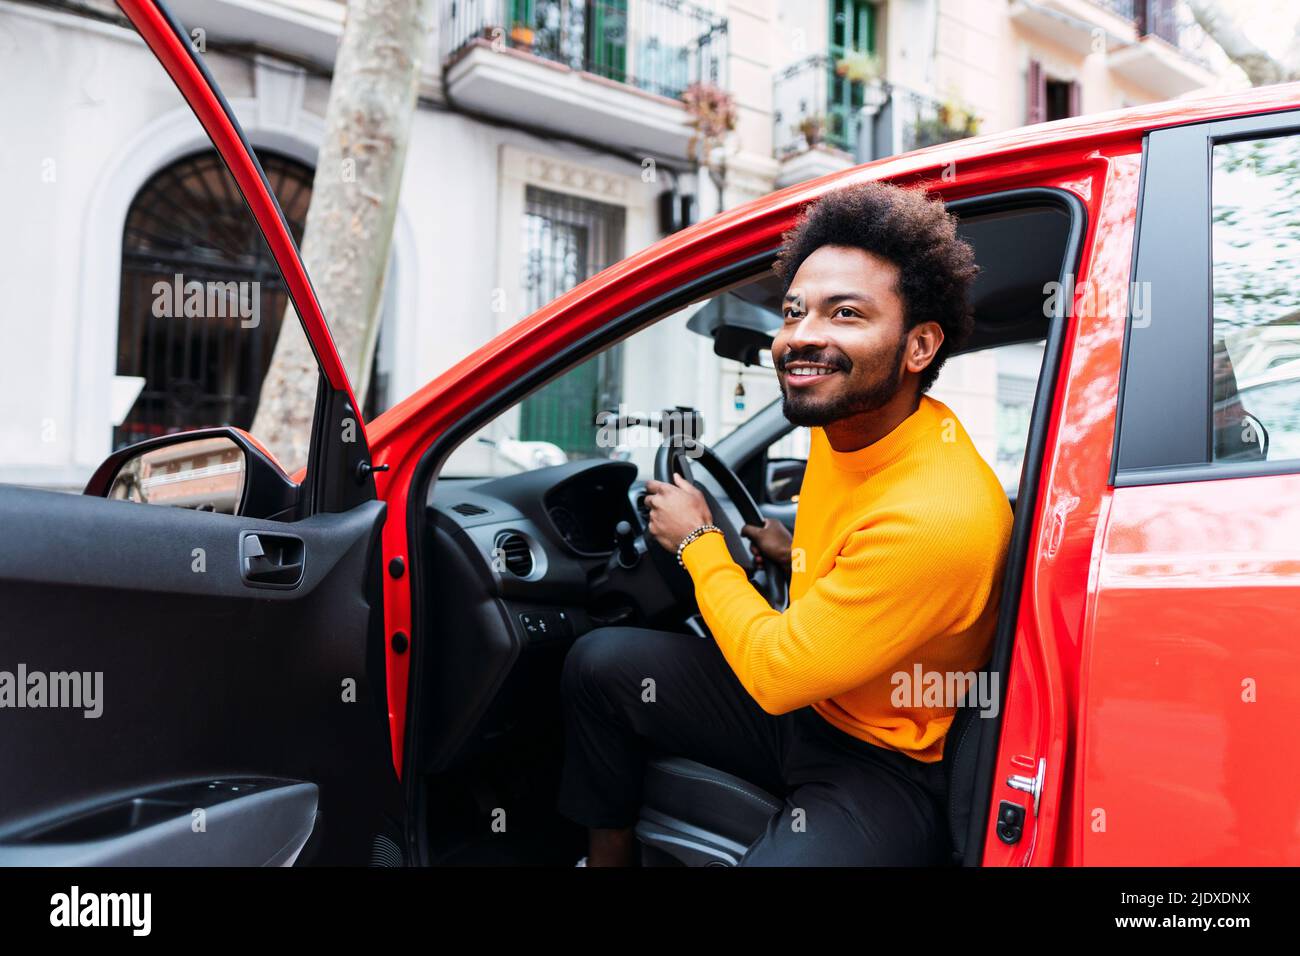 Smiling Afro man disembarking from car Stock Photo